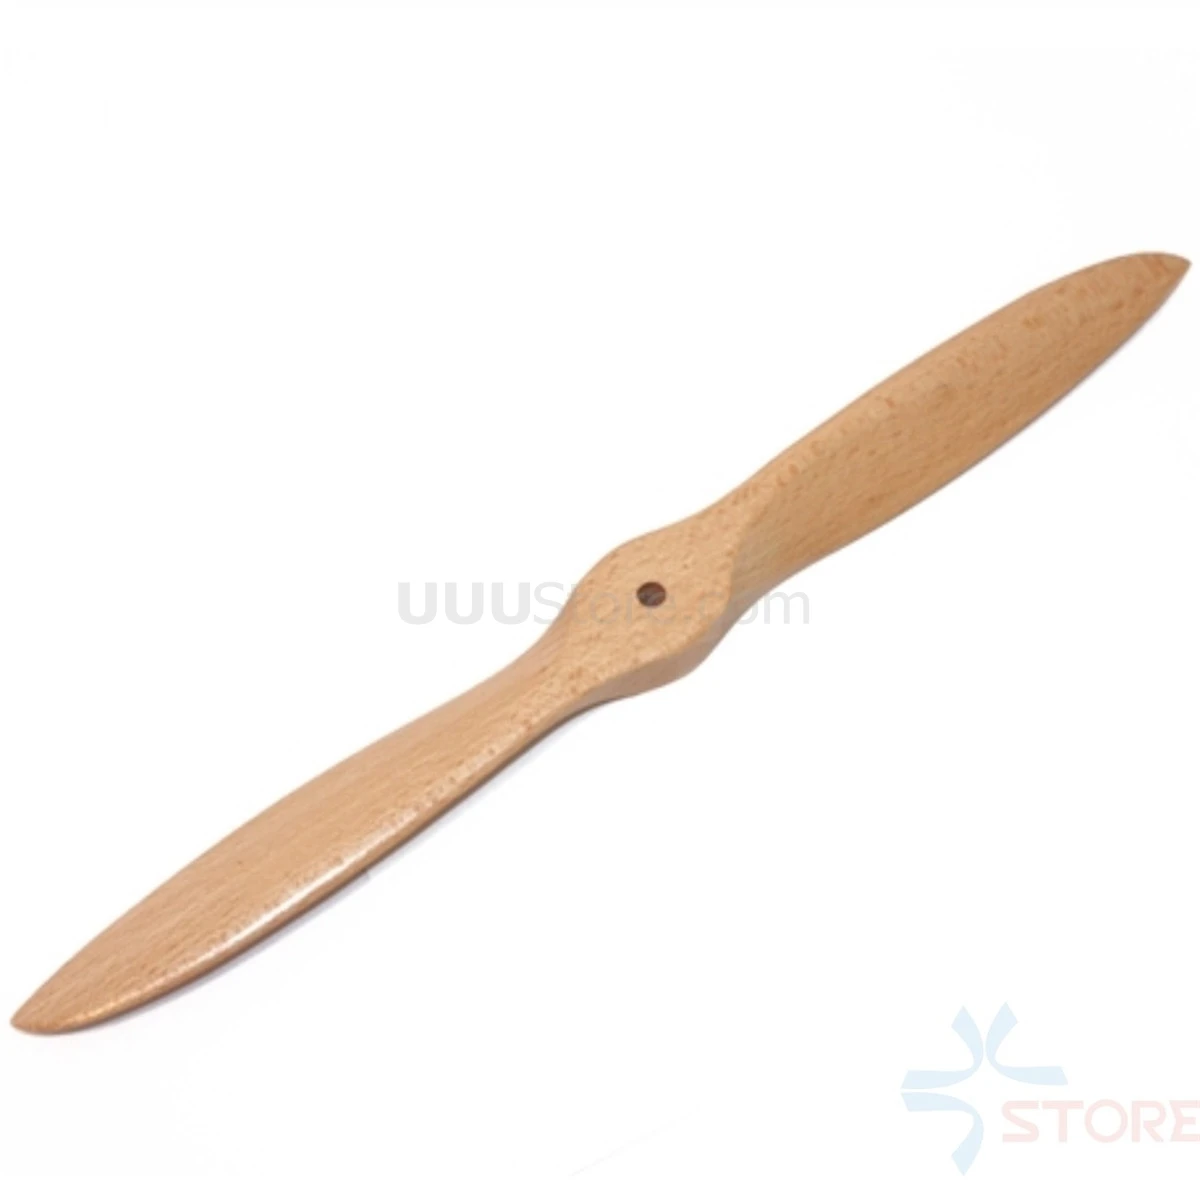 Wood Wooden Propeller 27x8,27x10,28x8,28x10 Prop for RC Aircraft Plane Airplane DLE110CC Gasoline Engine 3